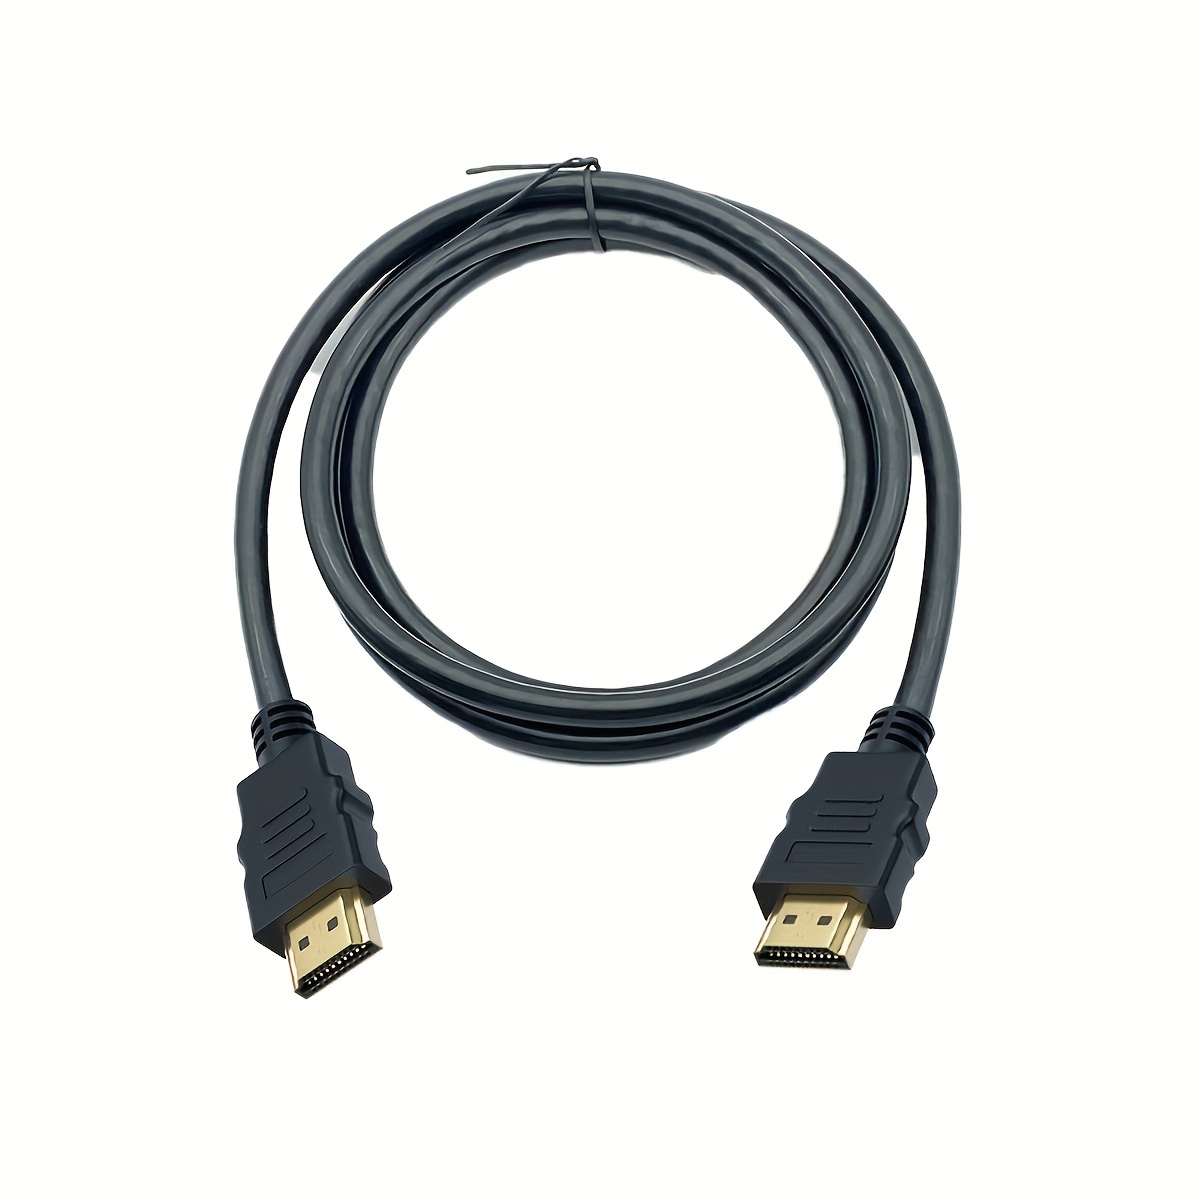 Master Cables Black HDMI Cable for Sony Playstation 4 Consoles - 2m -  High-Speed, Gold Plated, Premium Quality